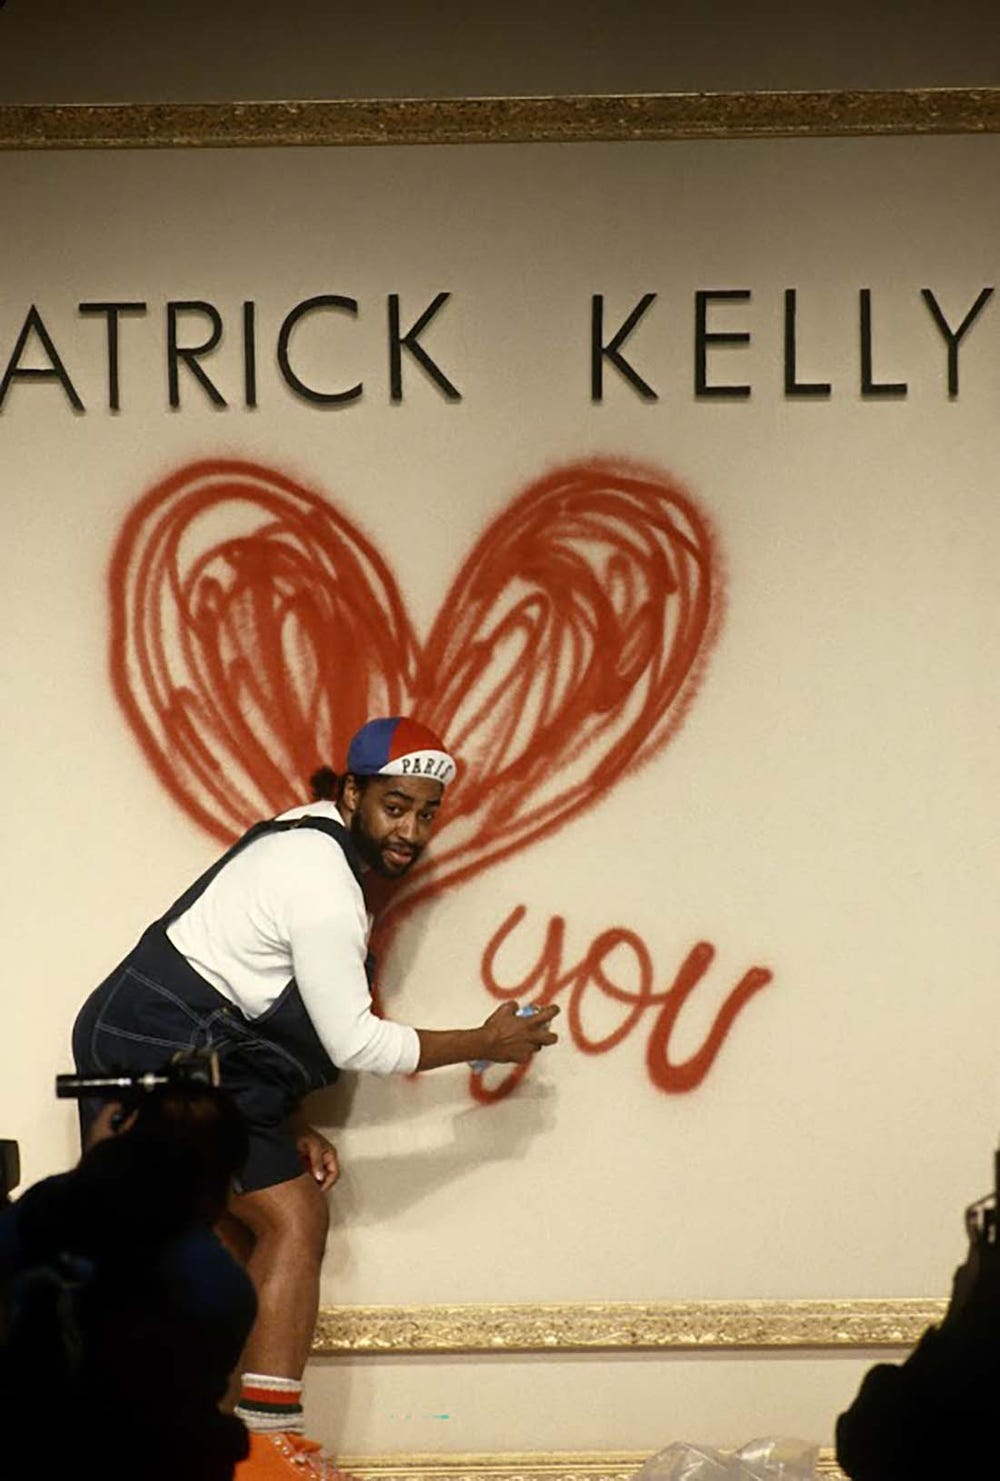 Patrick Kelly posing with spray paint in front of a sign that reads "Patrick Kelly [heart] you"